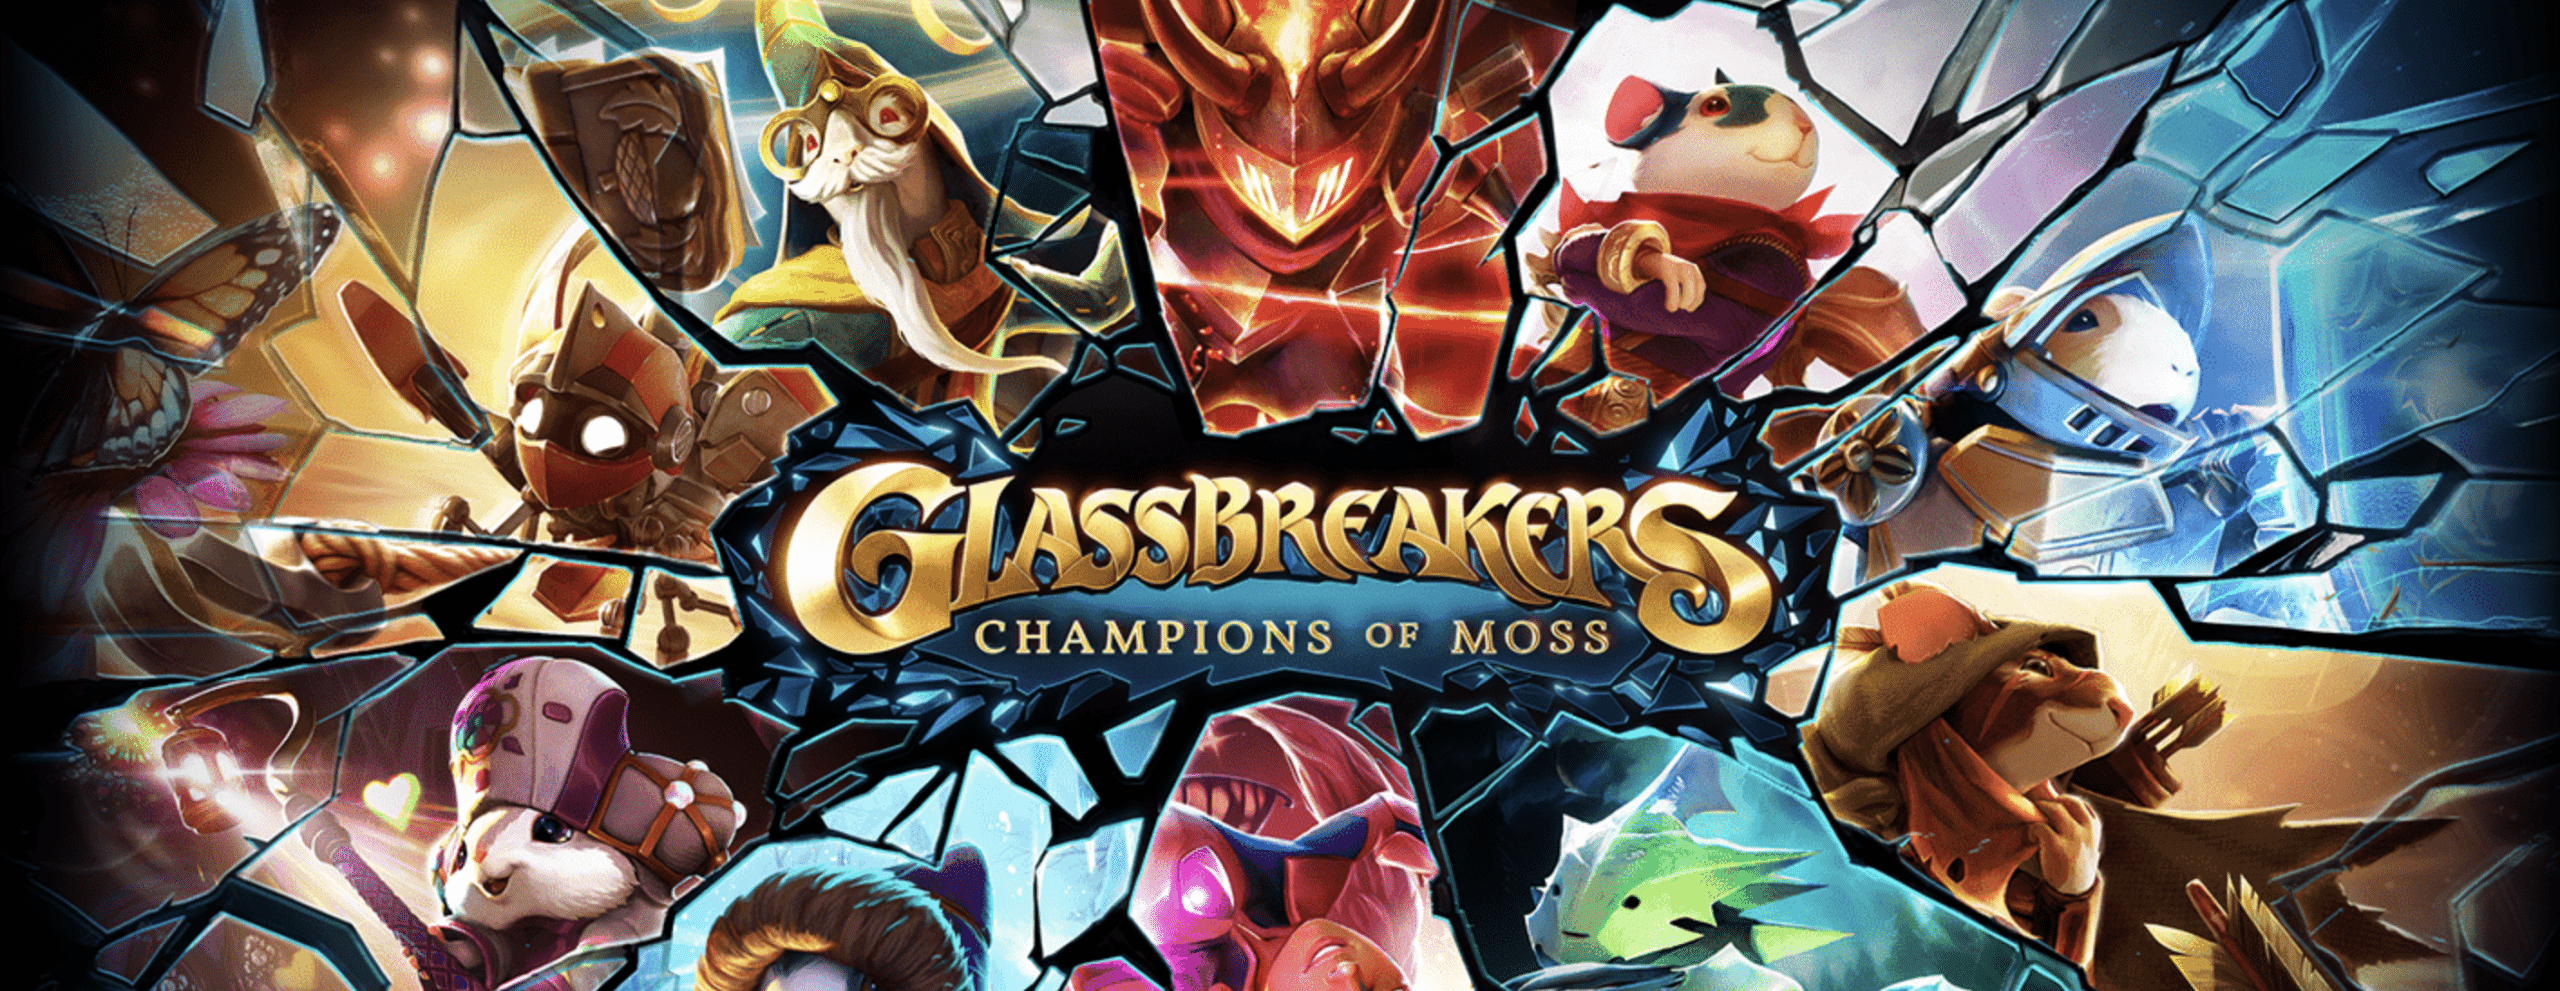 Polyarc Teases Glassbreakers: Champions of Moss